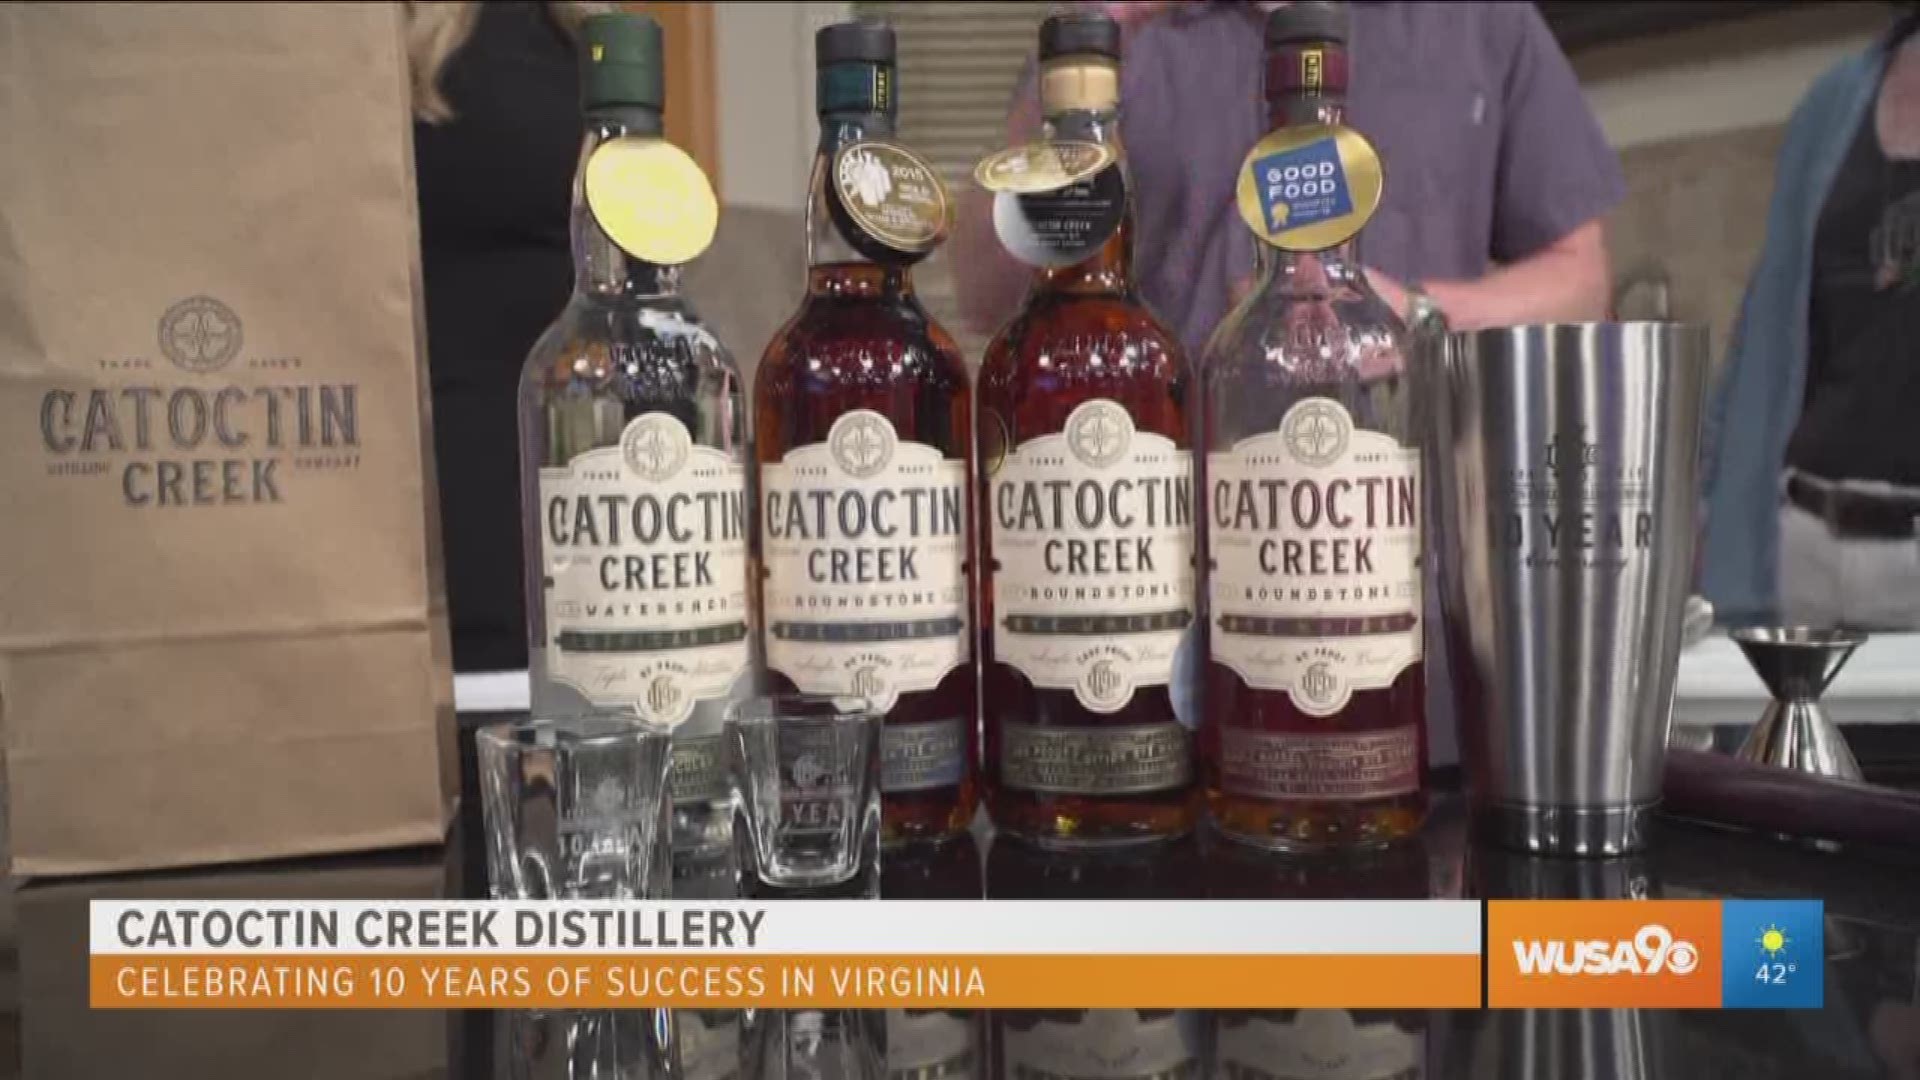 Scott & Becky Harris, owners of Catoctin Creek Distillery in Purcellville, VA, celebrate 10 years of success with a southern soirée and a Mint Julep.